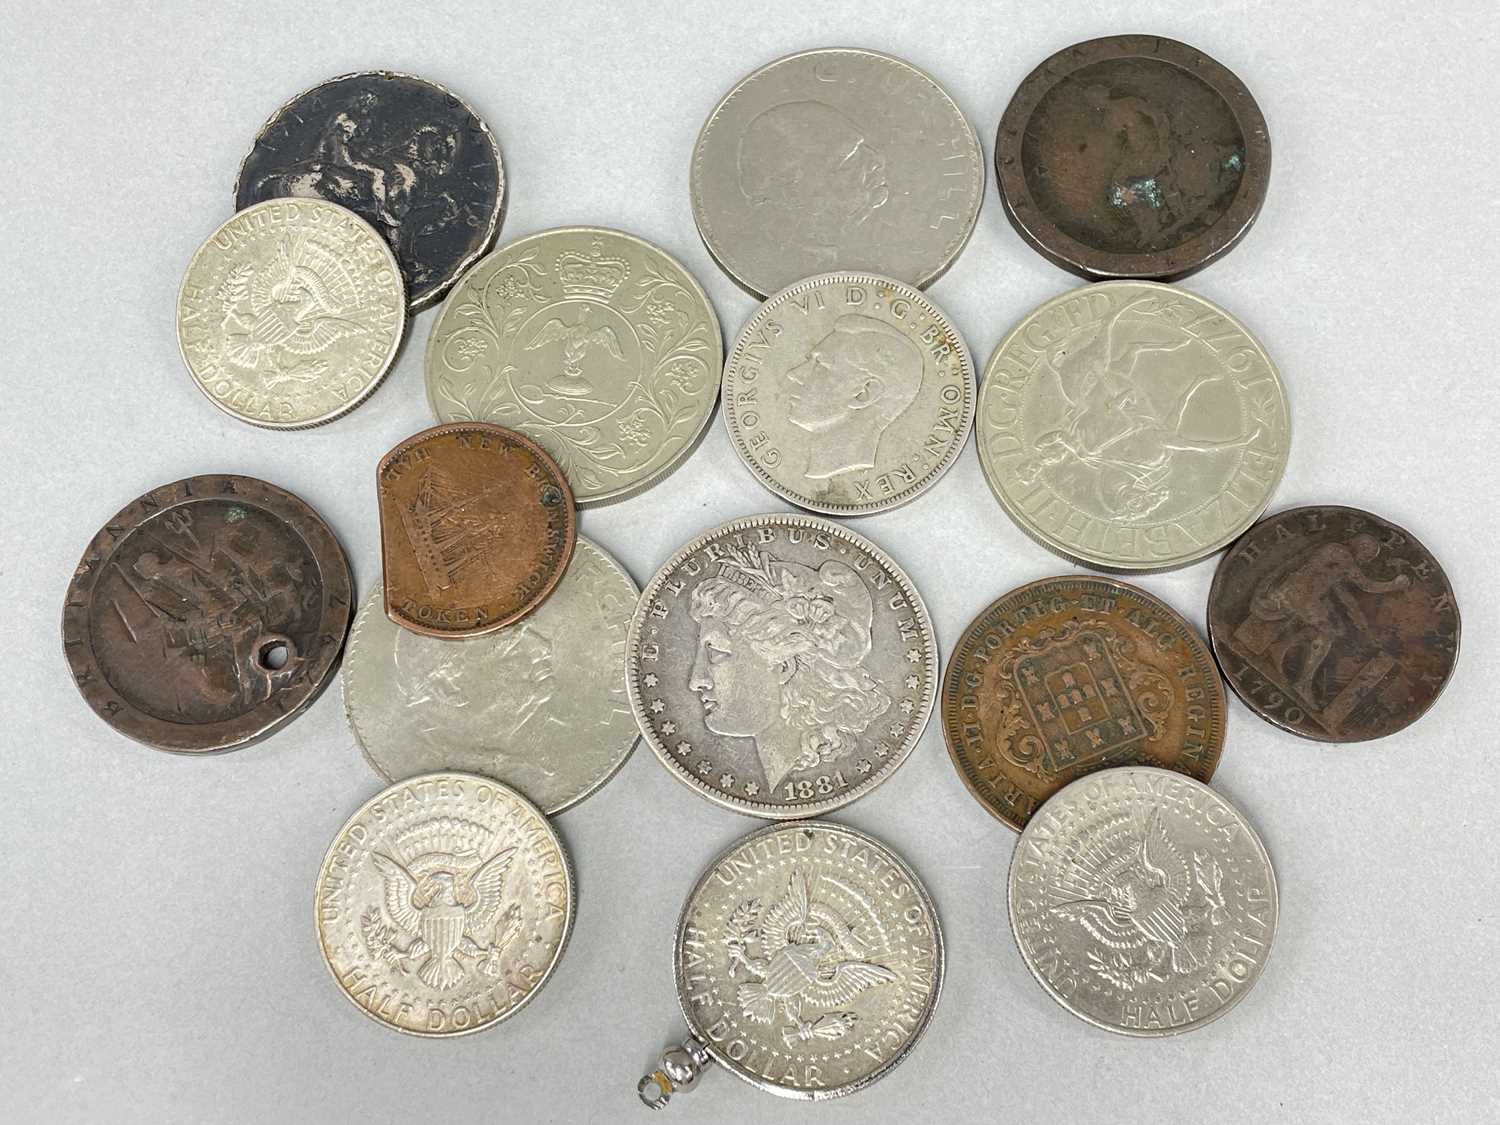 ASSORTED PRE-DECIMAL COINAGE & WWI MEDAL, including 1881 silver dollar, 2x 1964 Kennedy silver